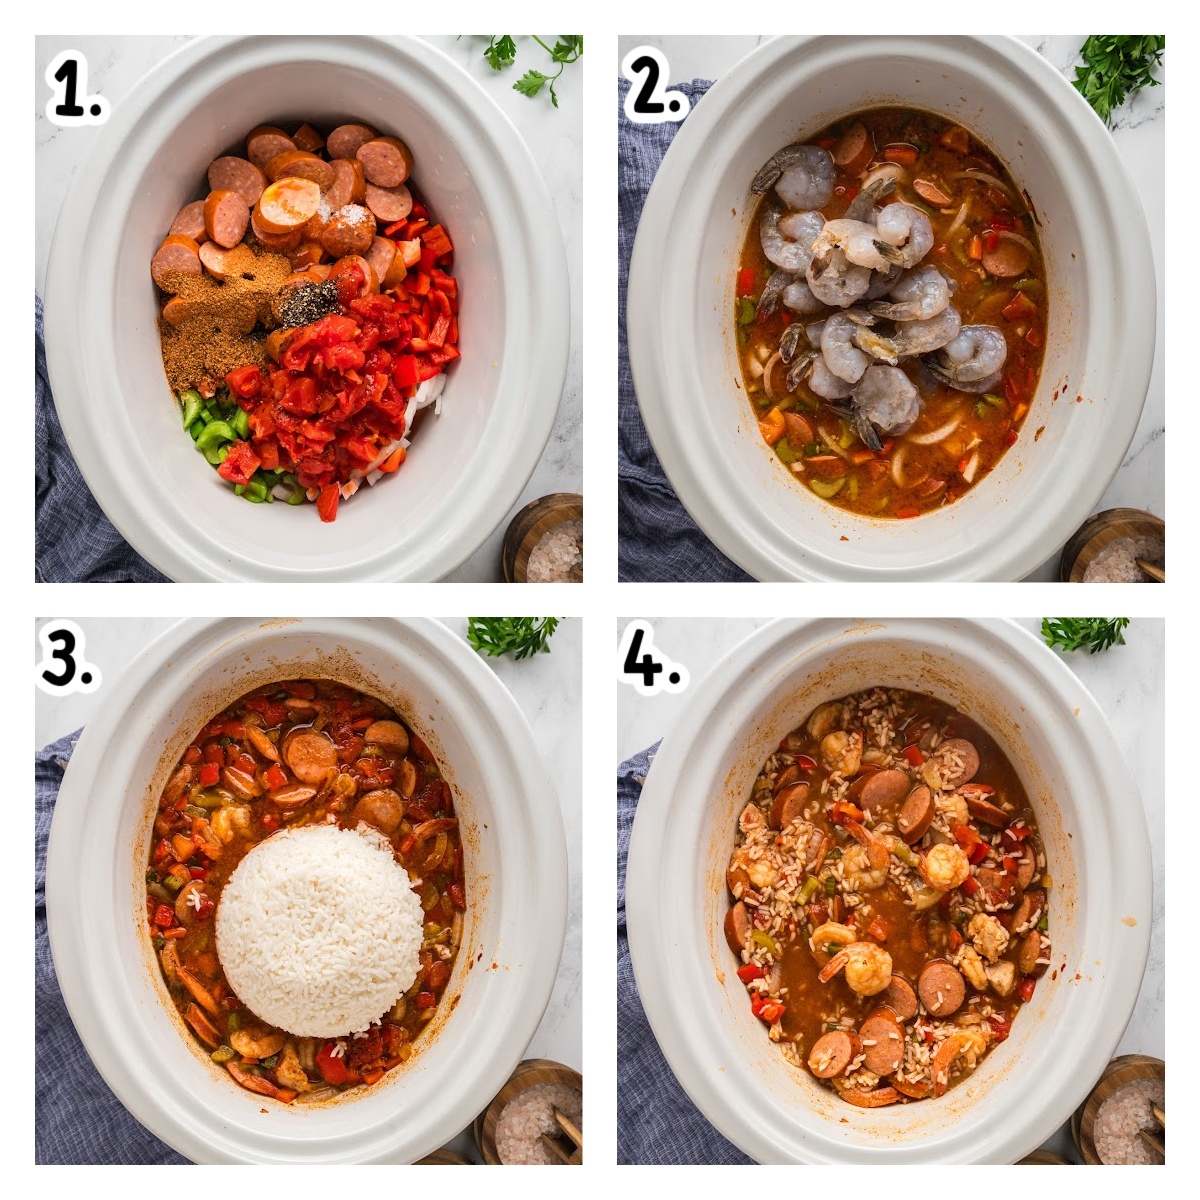 Four images showing how to make jambalaya in a slow cooker.